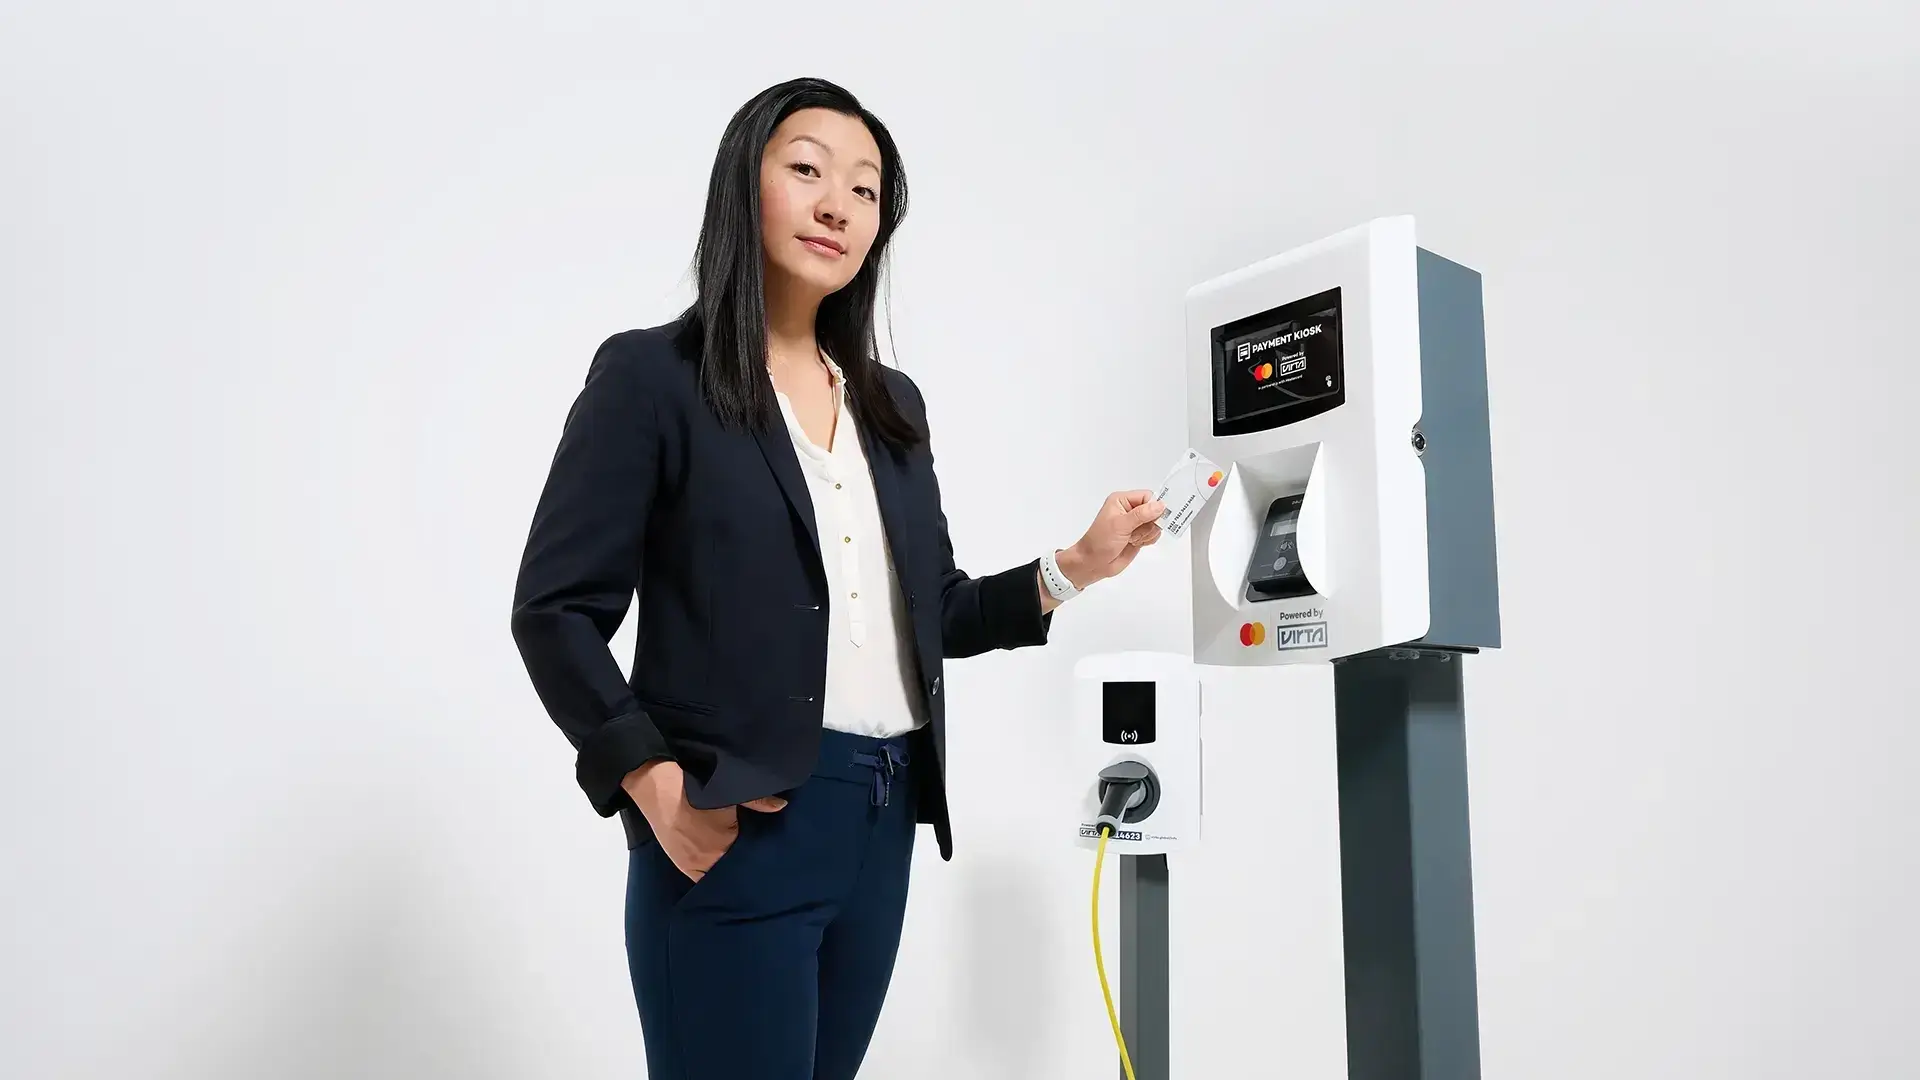 Woman standing beside a Virta payment kiosk and an AC charging station